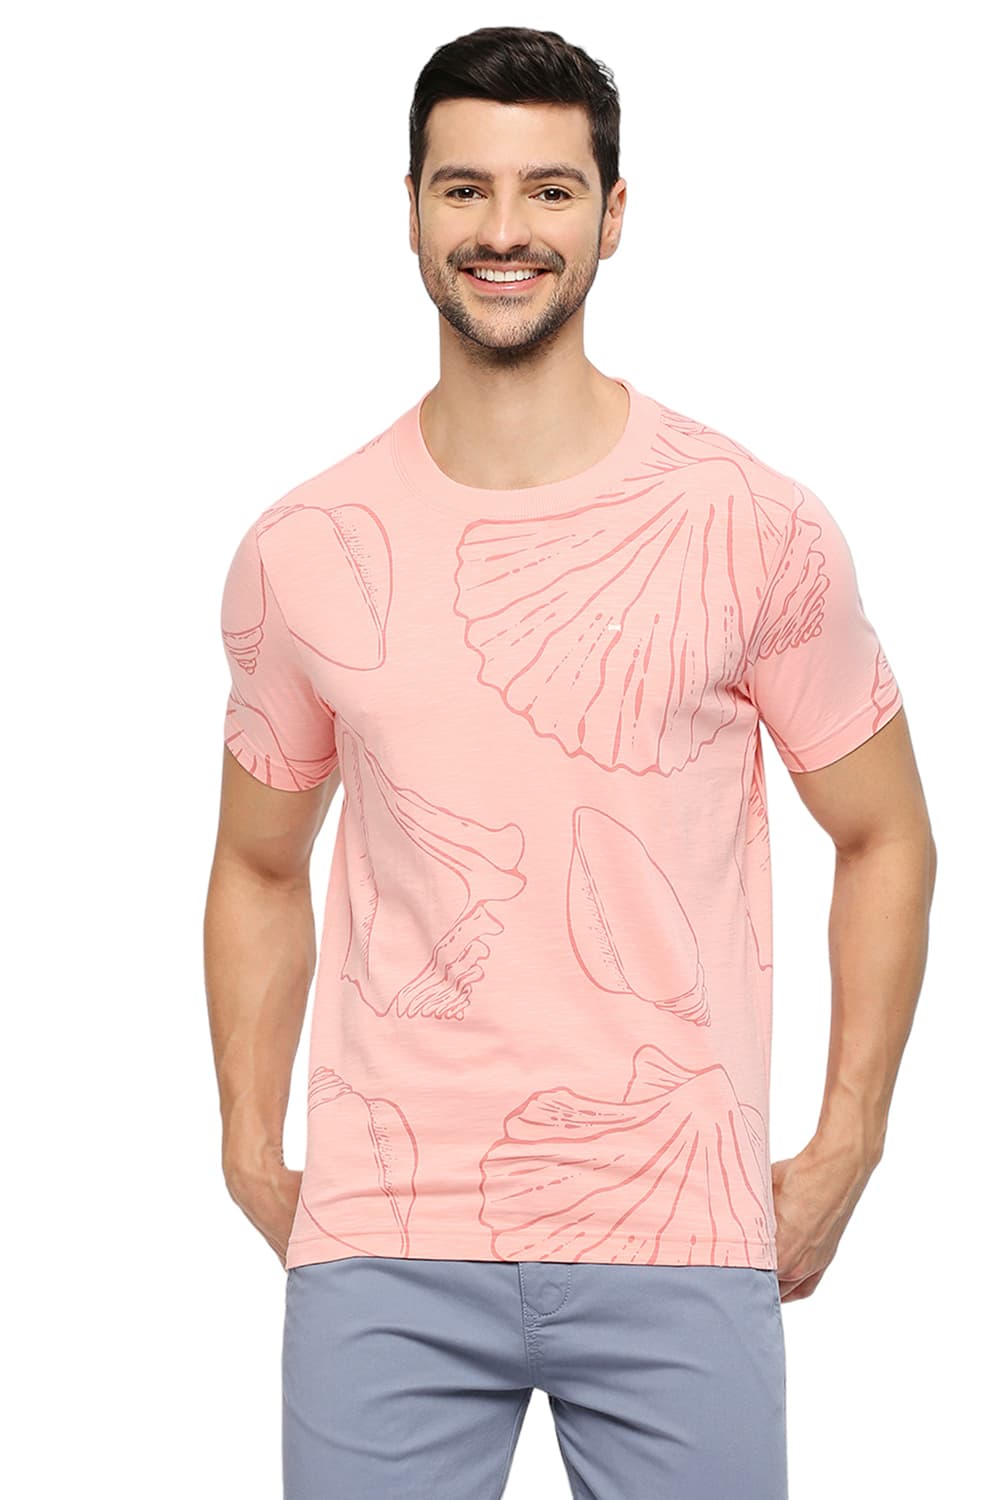 BASICS MUSCLE FIT COTTON PRINTED CREW T-SHIRTS